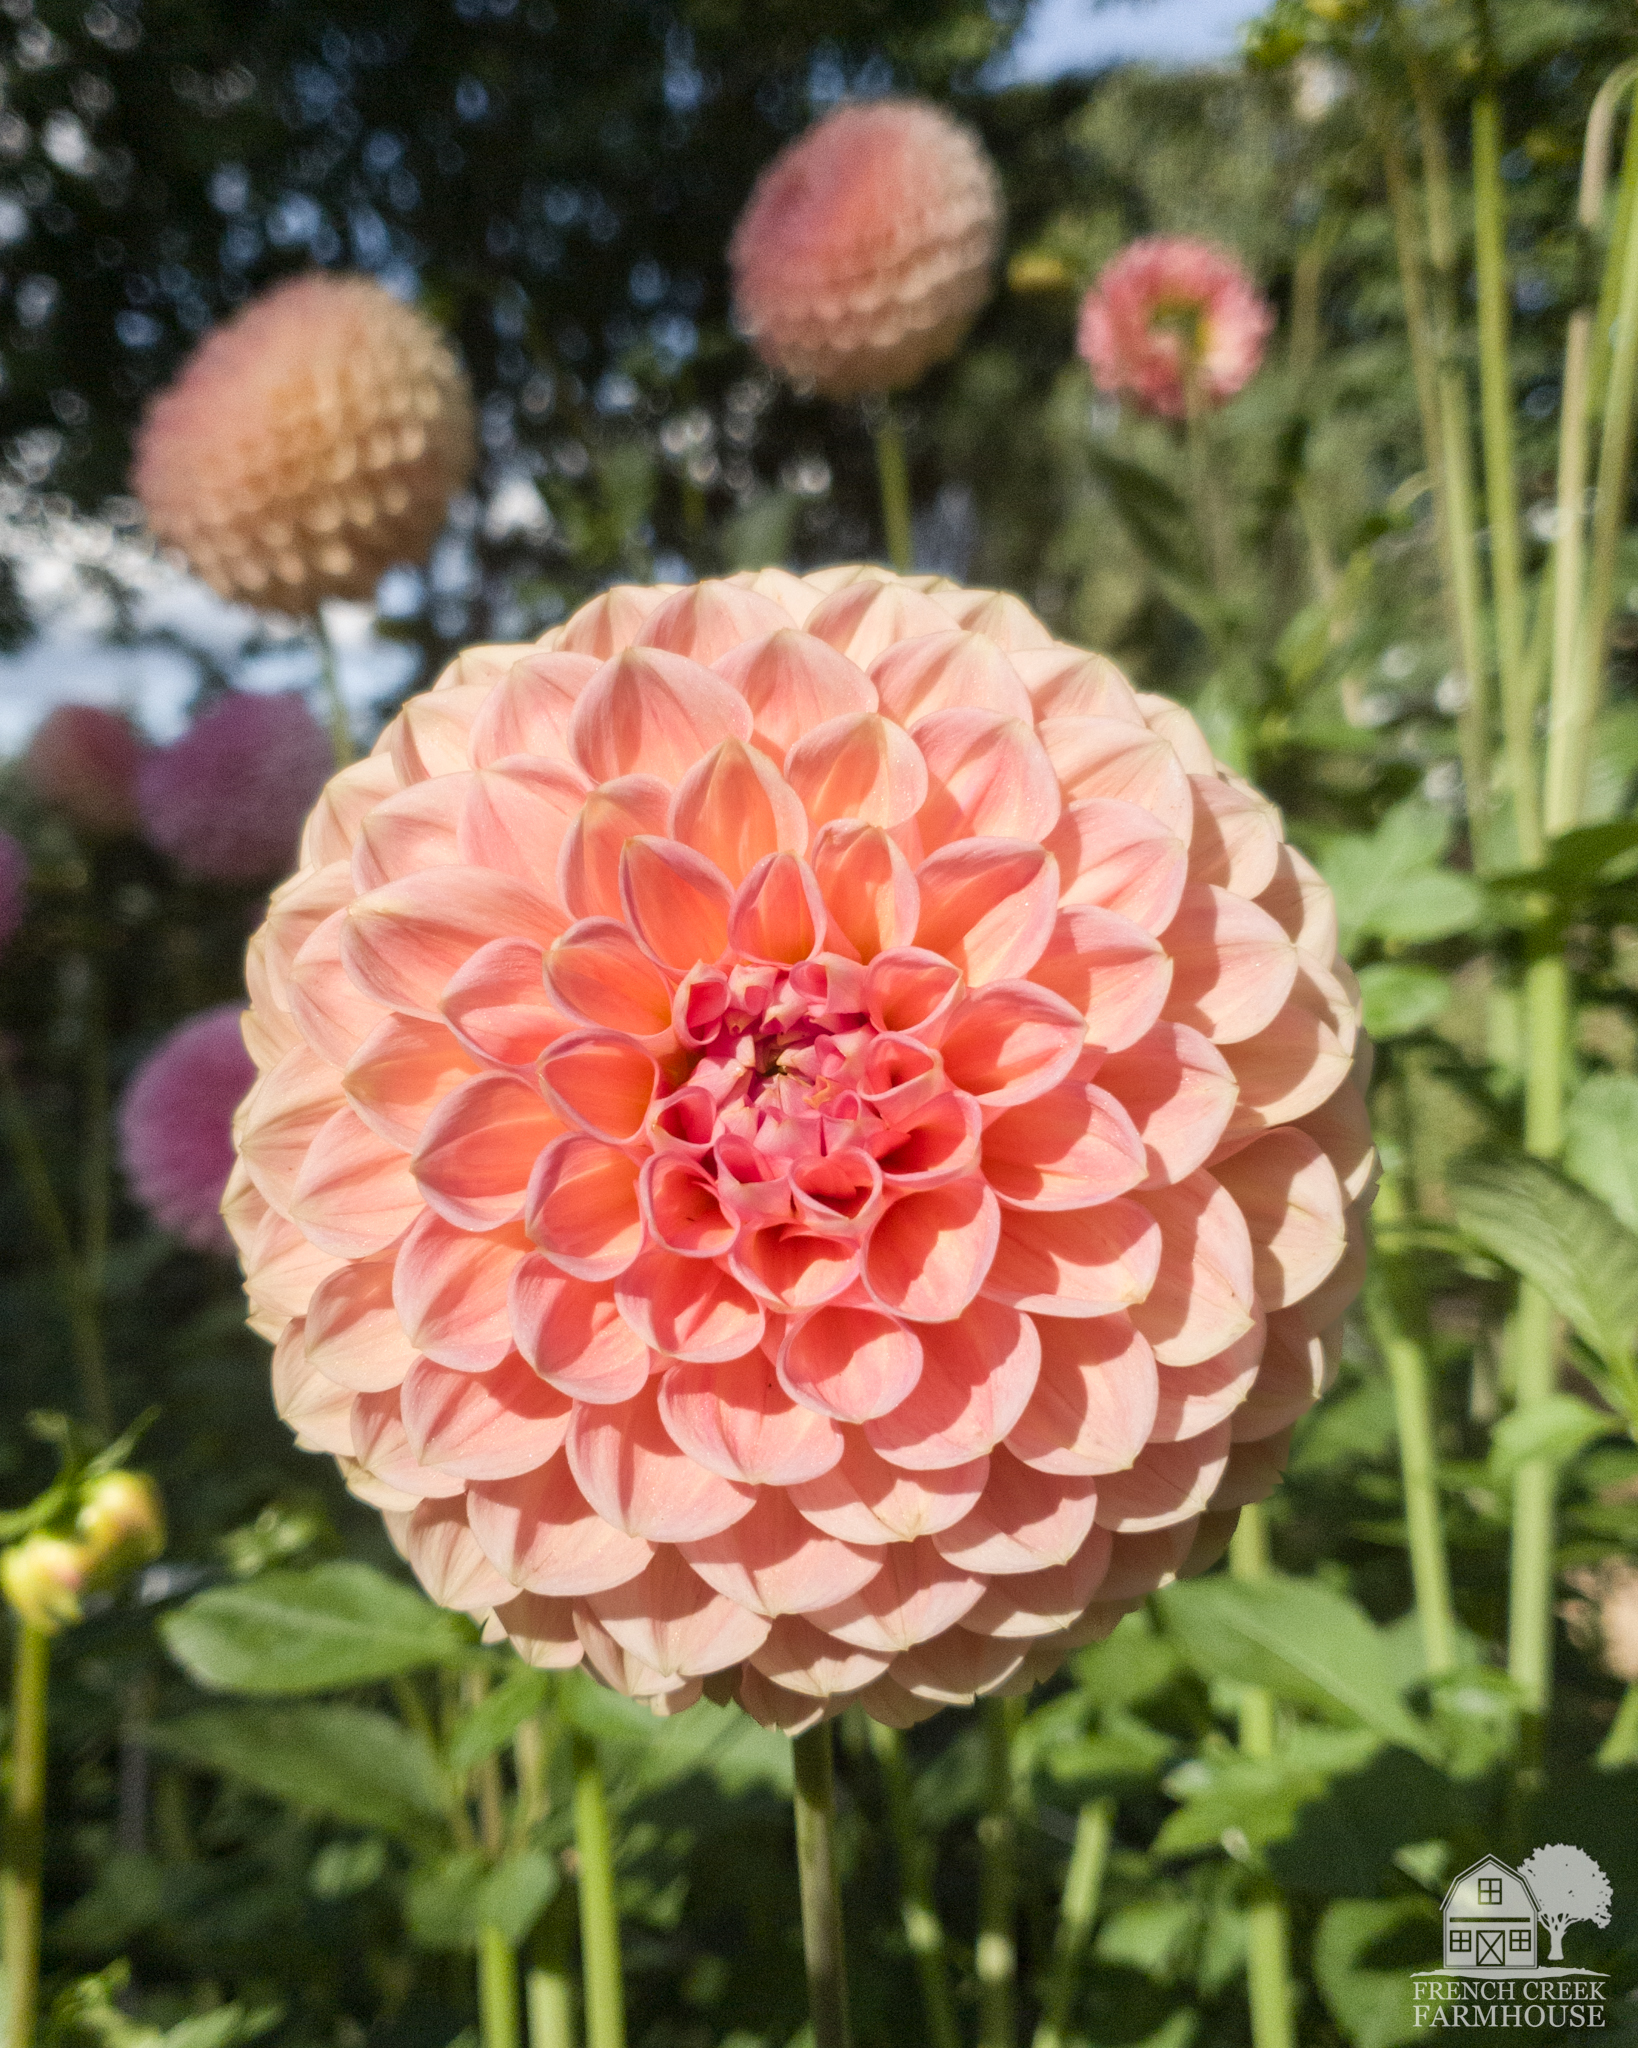 Of all our dahlias, Linda's Baby is one of the most productive varieties we grow